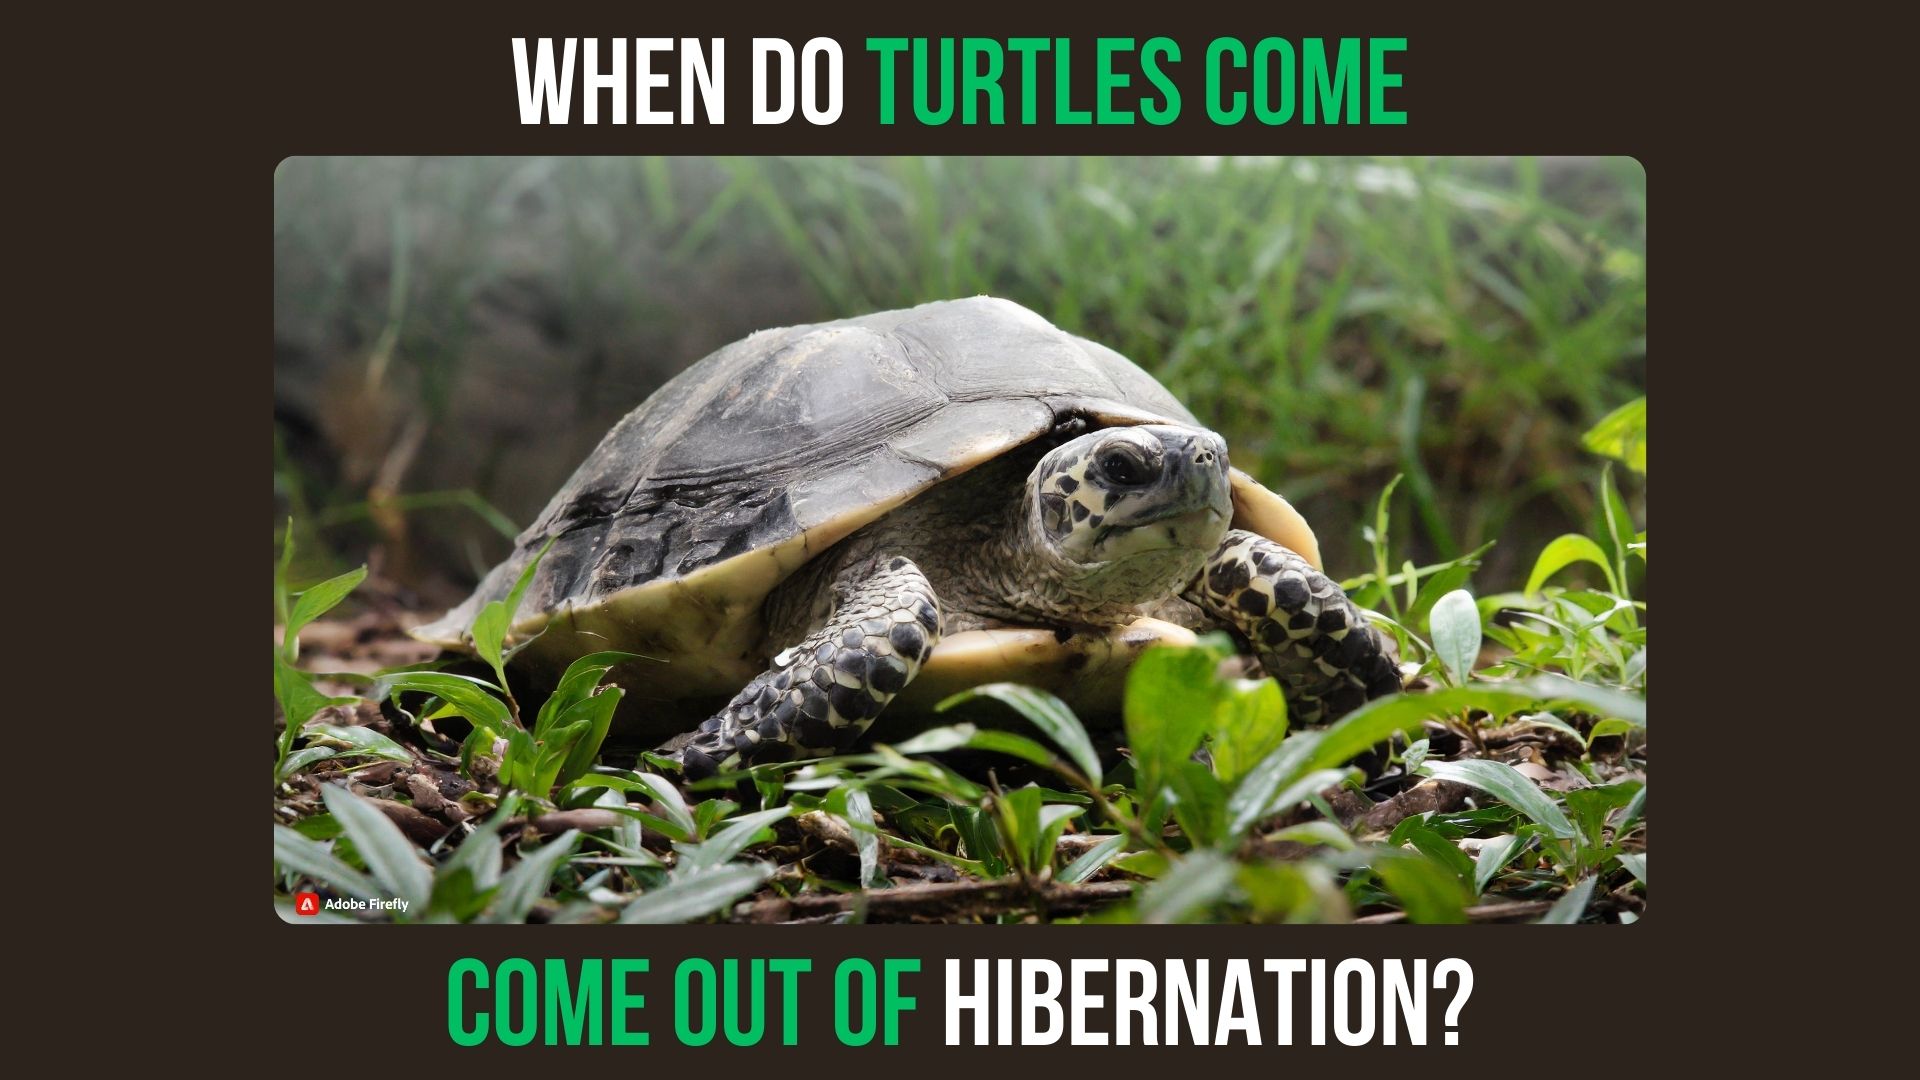 When Do Turtles Come Out of Hibernation